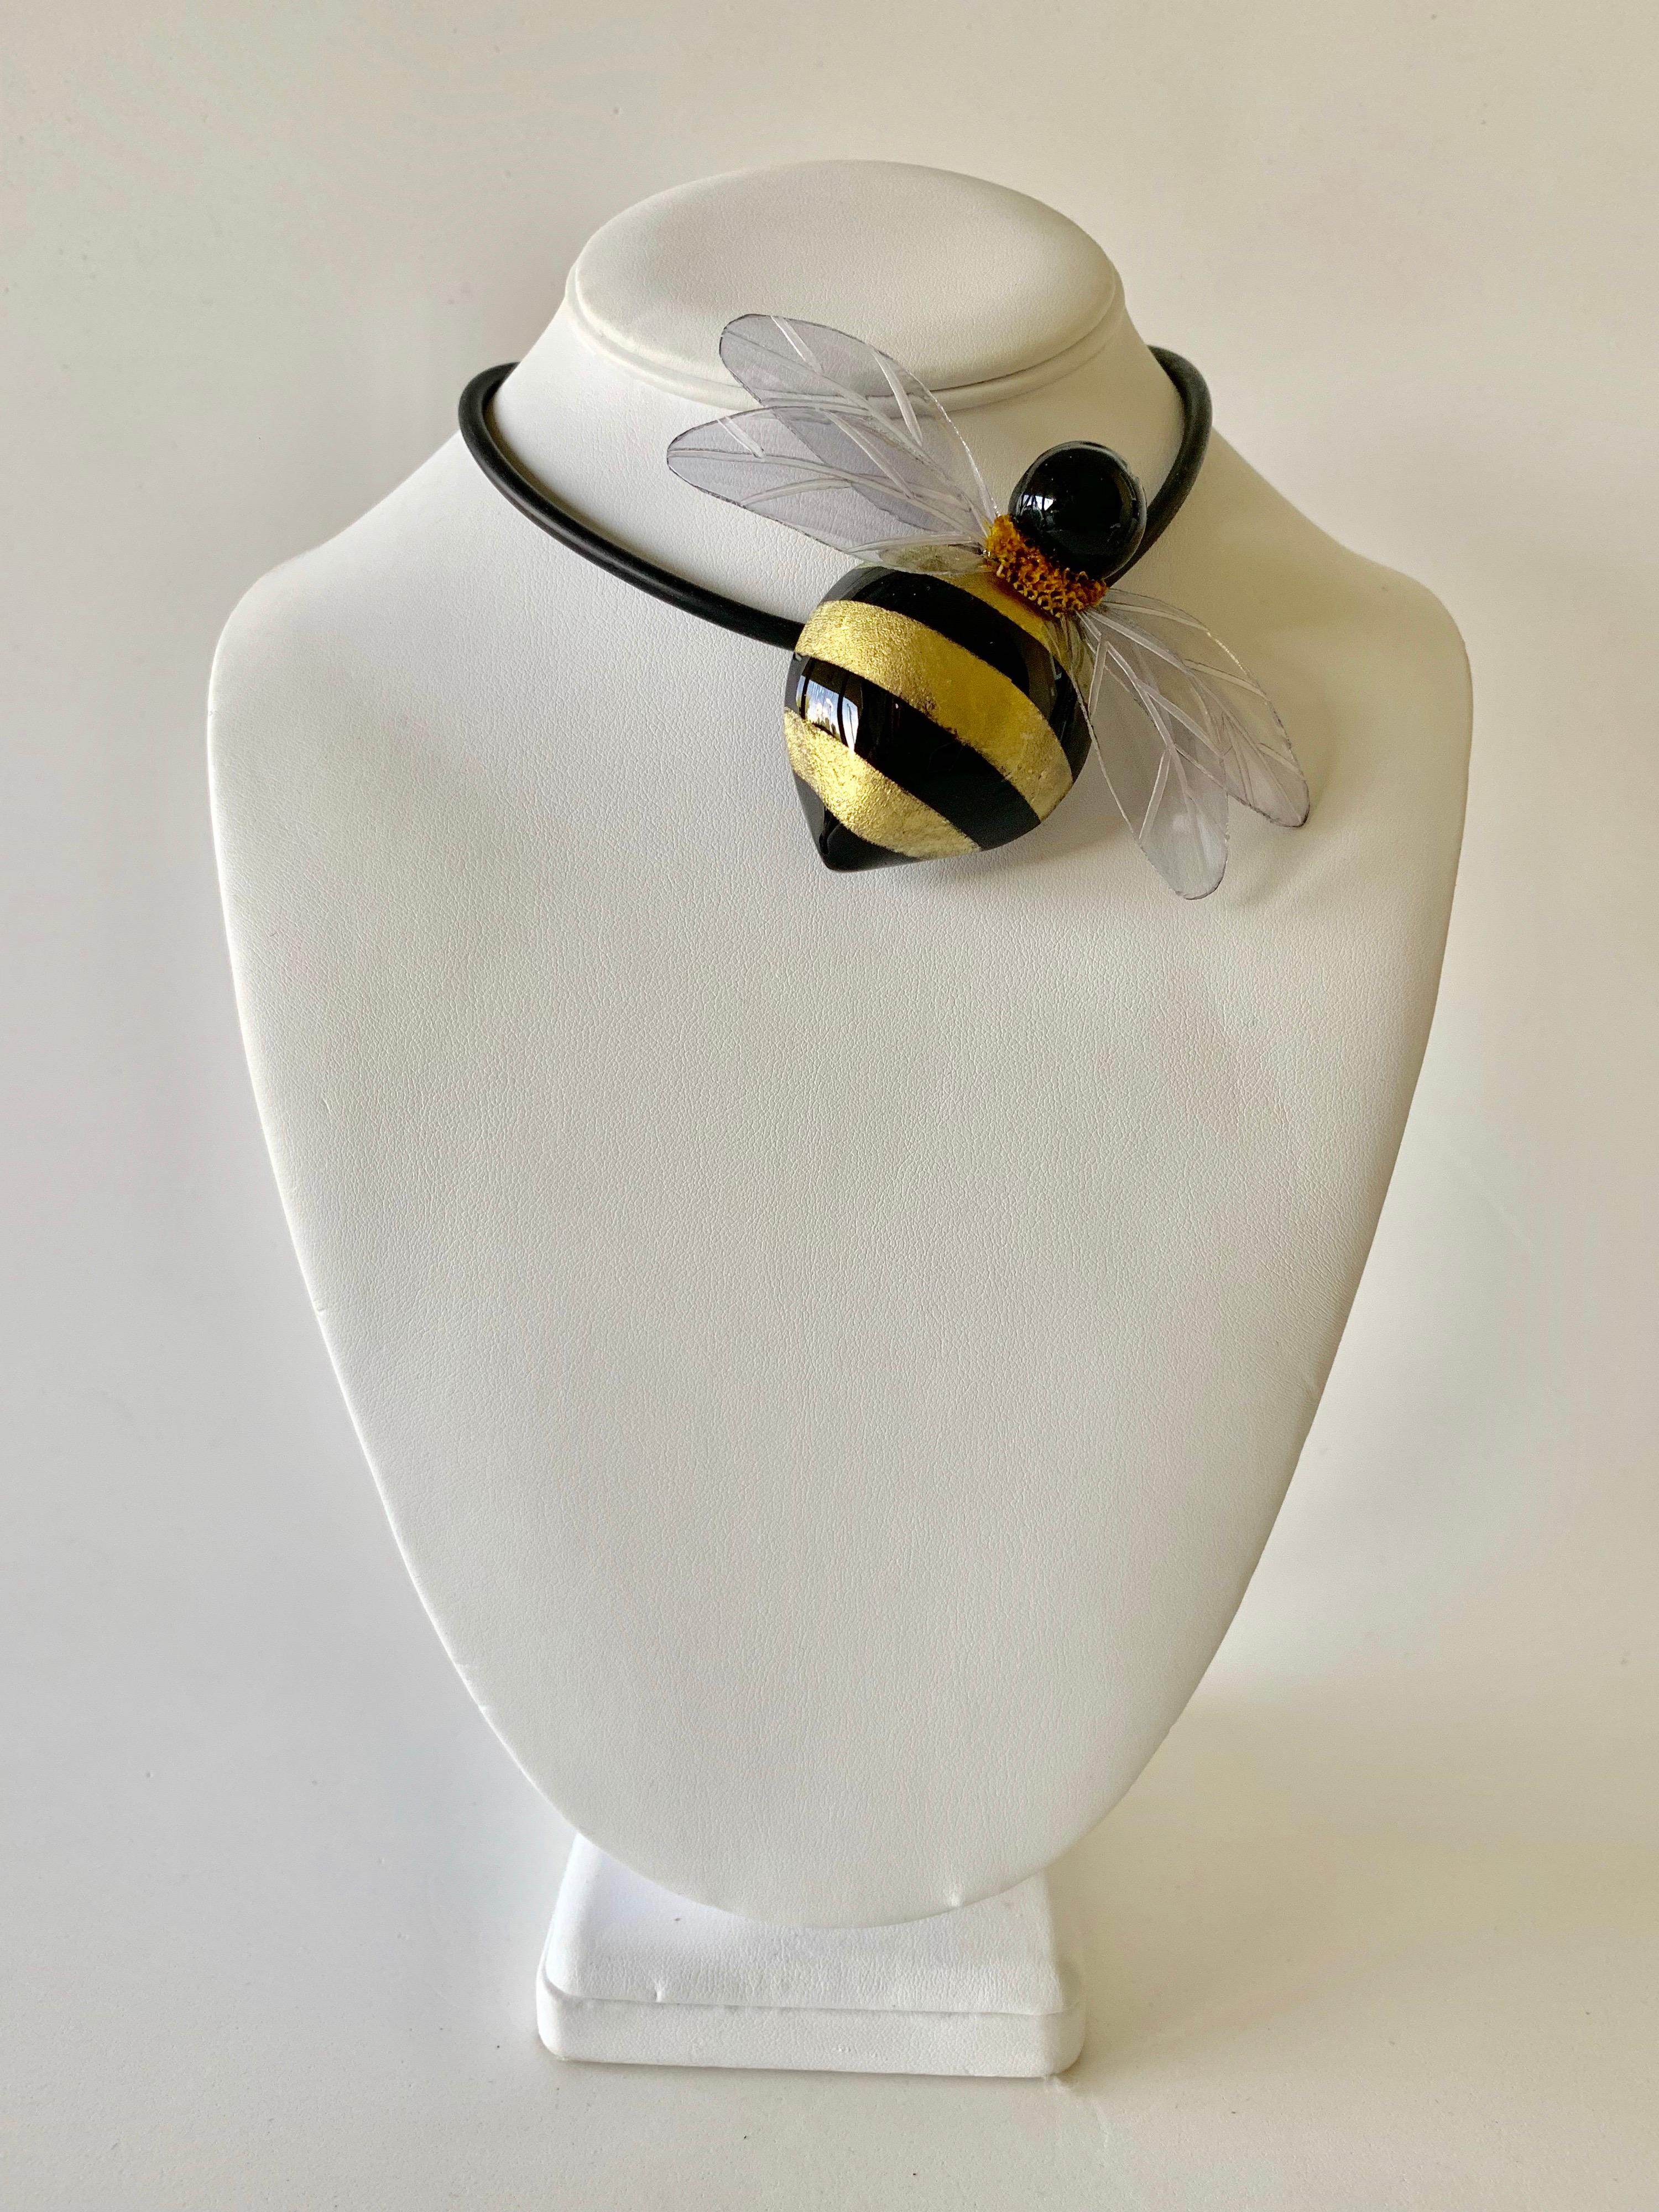 Unique handcrafted contemporary artisanal brooch - statement necklace made in Paris France by Cilea Paris - lightweight, featuring a large black and gold bumblebee. The bumblebee is comprised out of resin and enamel and has large carved clear